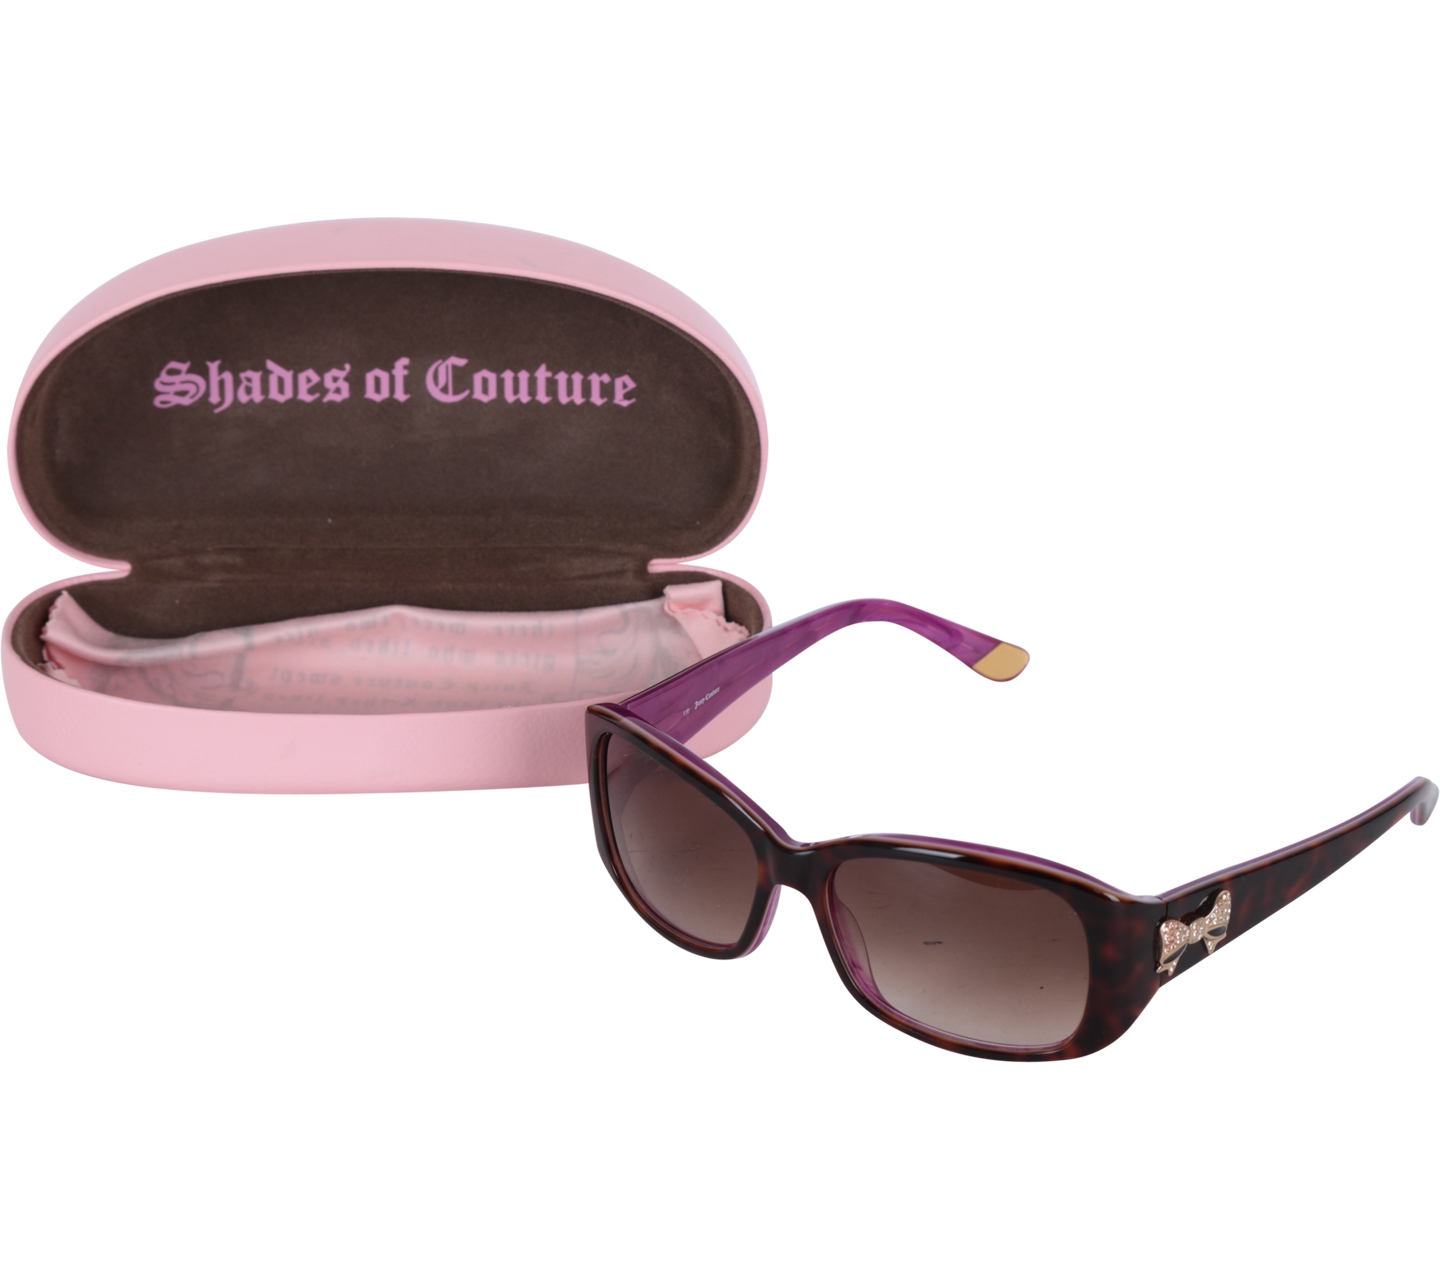 Juicy Couture Purple Shades of Couture Sunglasses